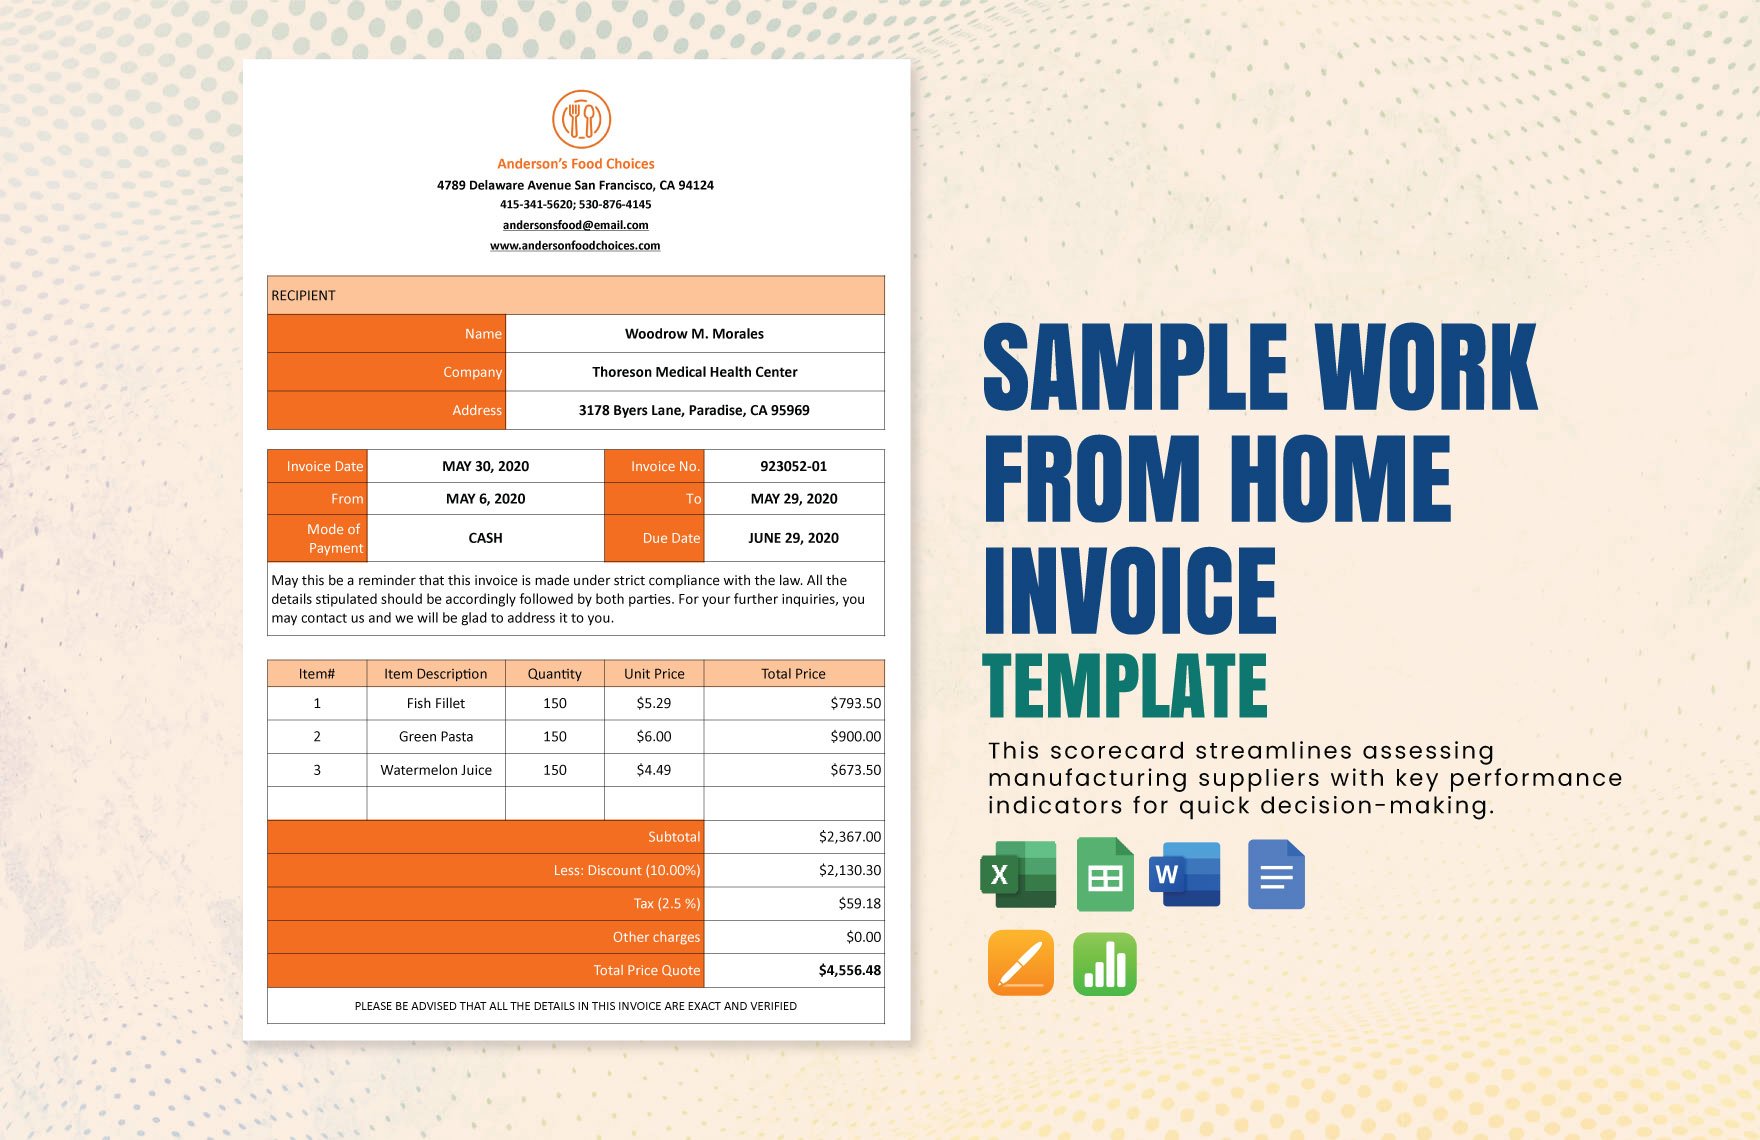 Sample Work From Home Invoice Template in Word, Google Docs, Excel, Google Sheets, Apple Pages, Apple Numbers